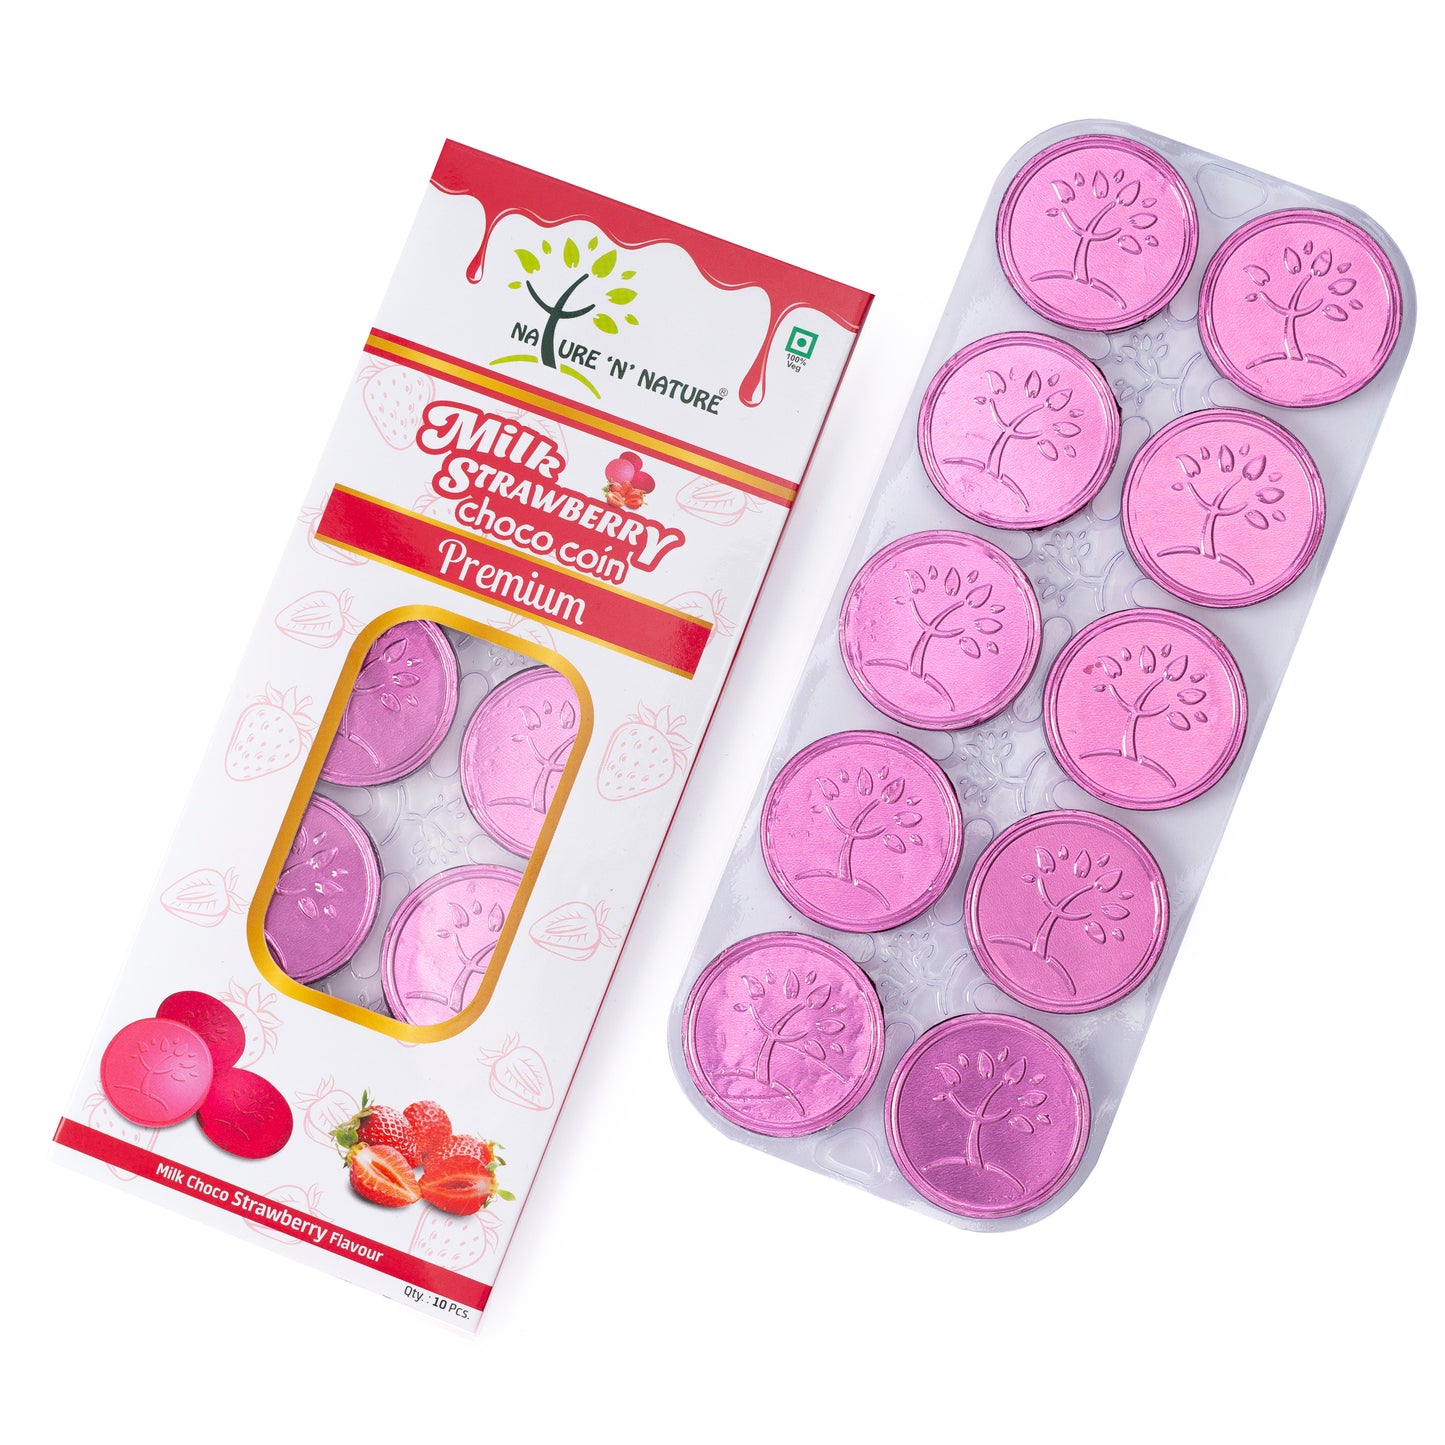 NATURE 'N' NATURE Pink Coin Strawberry Chocolate Premium Pack, 60gms (10 Big Coins), Pack of 2